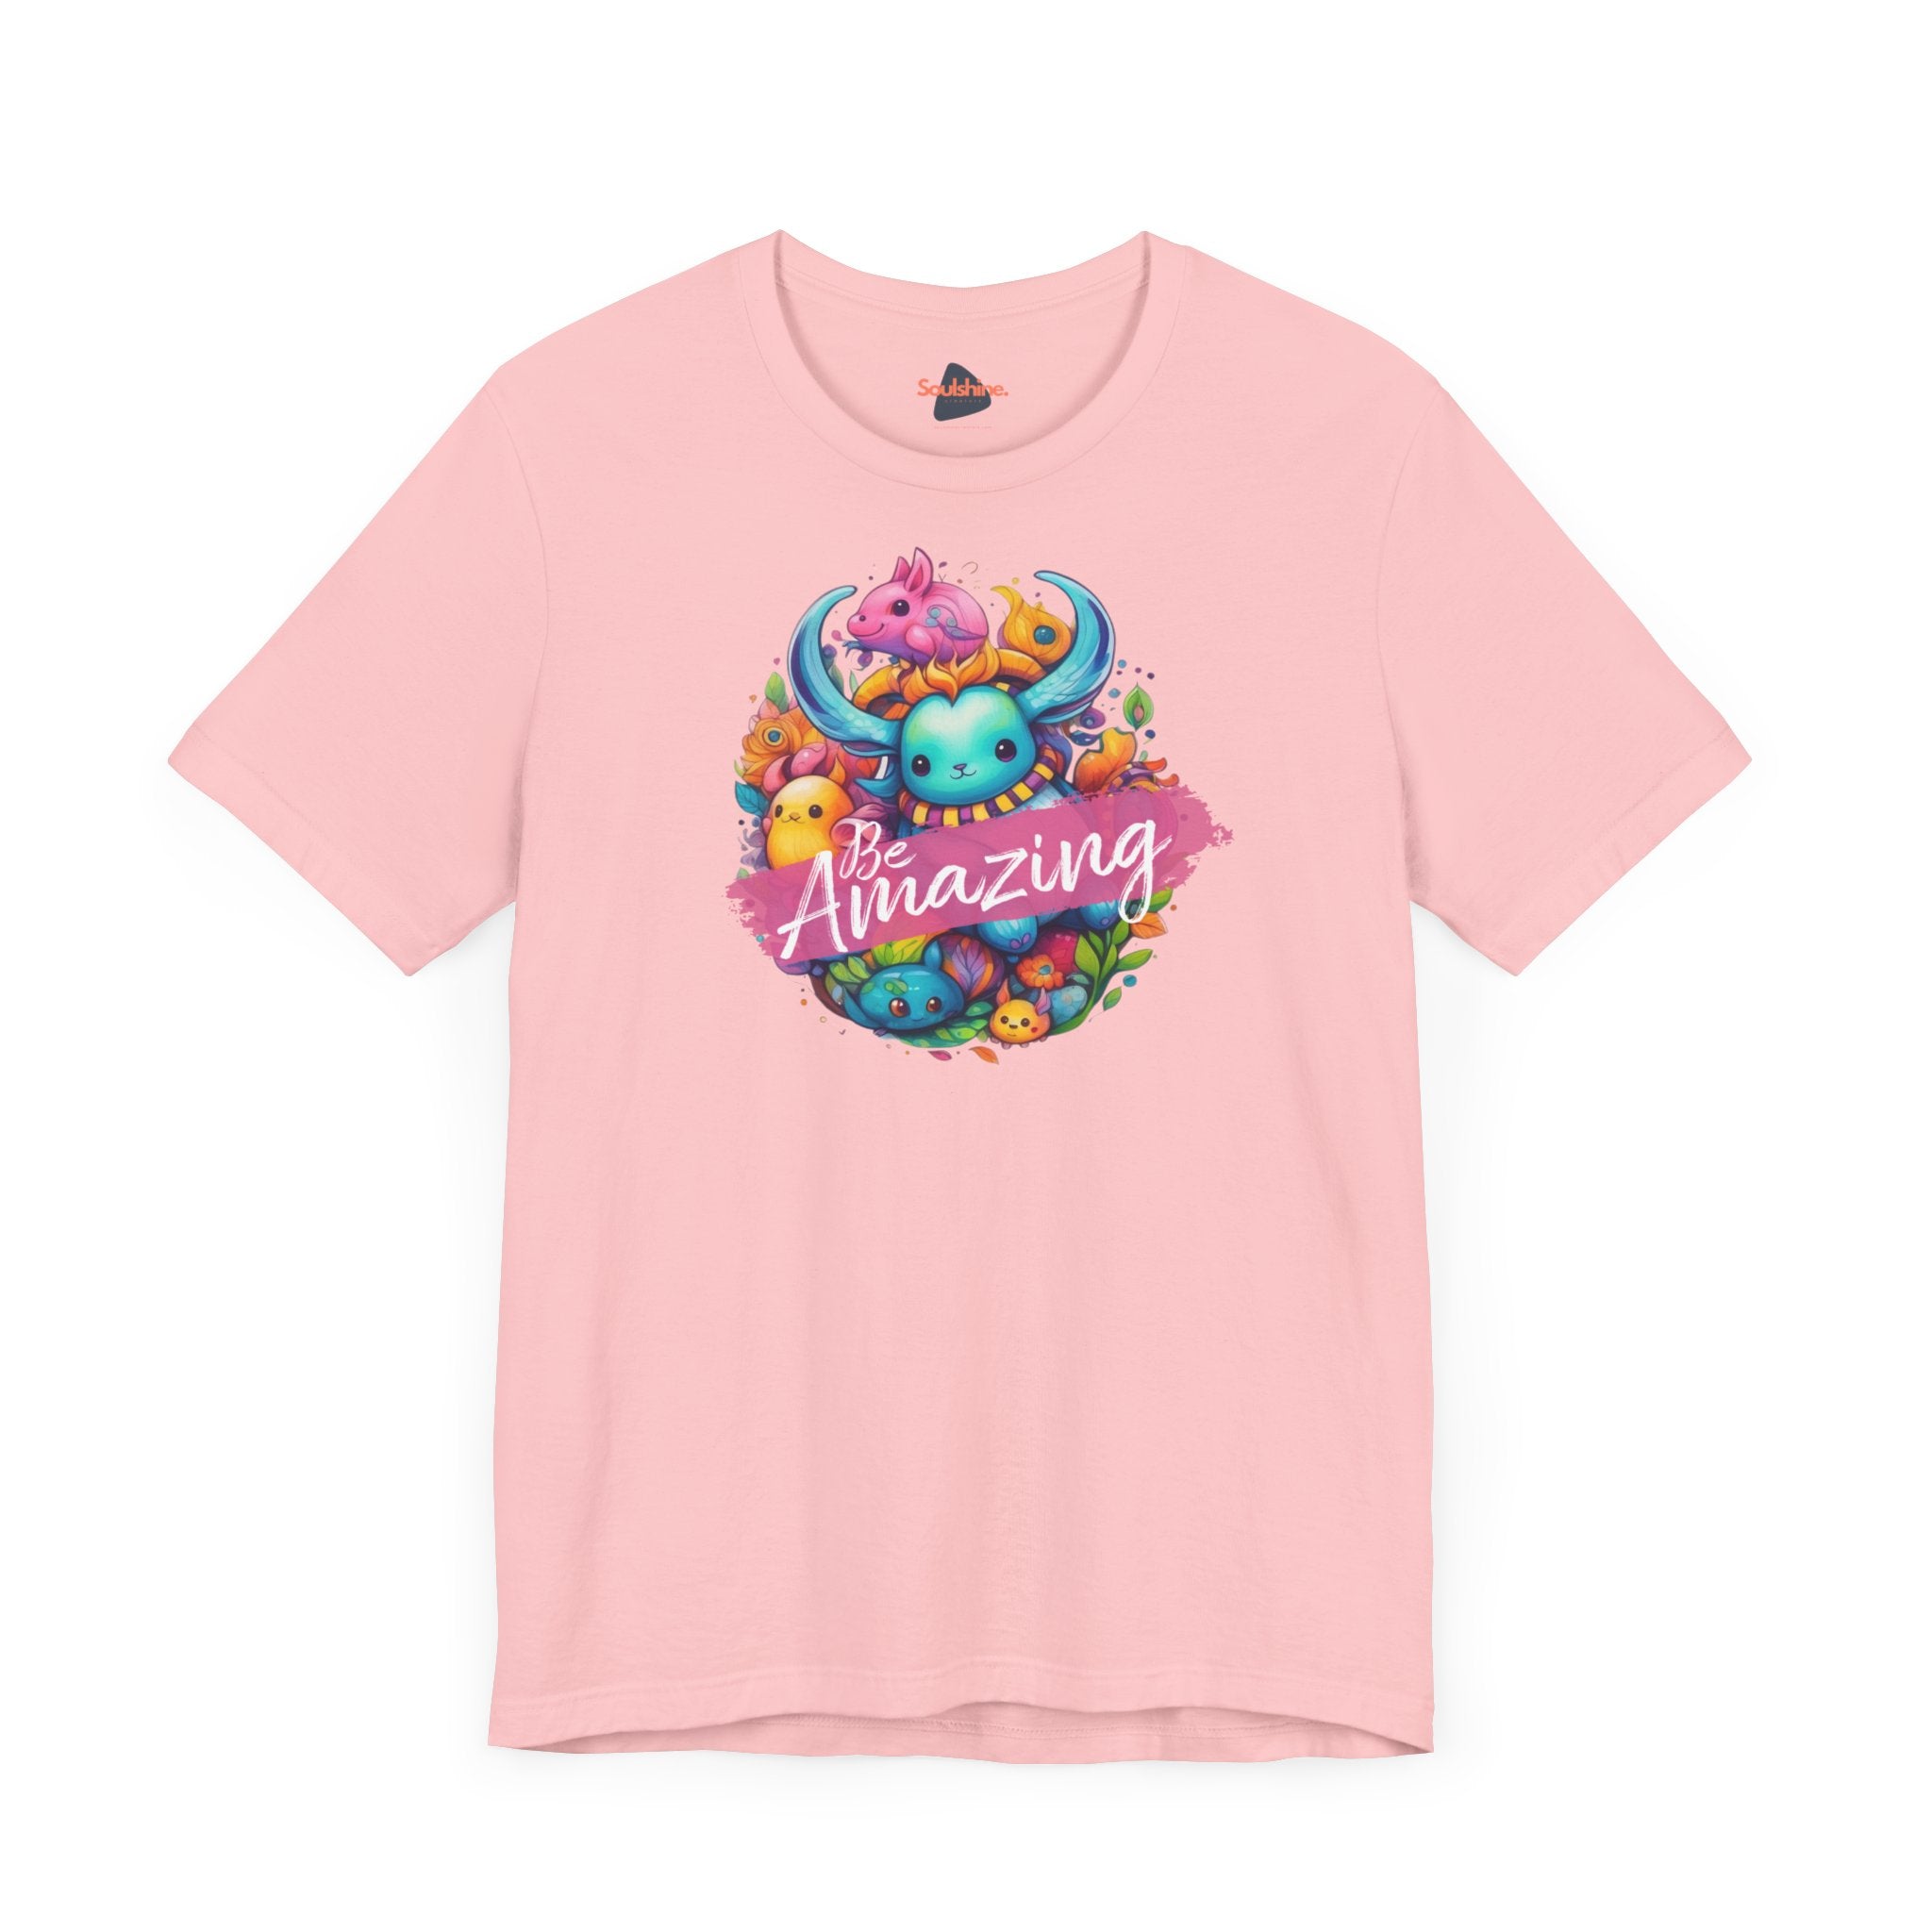 Direct-to-garment printed pink t shirt with ’Be Amazing’ design